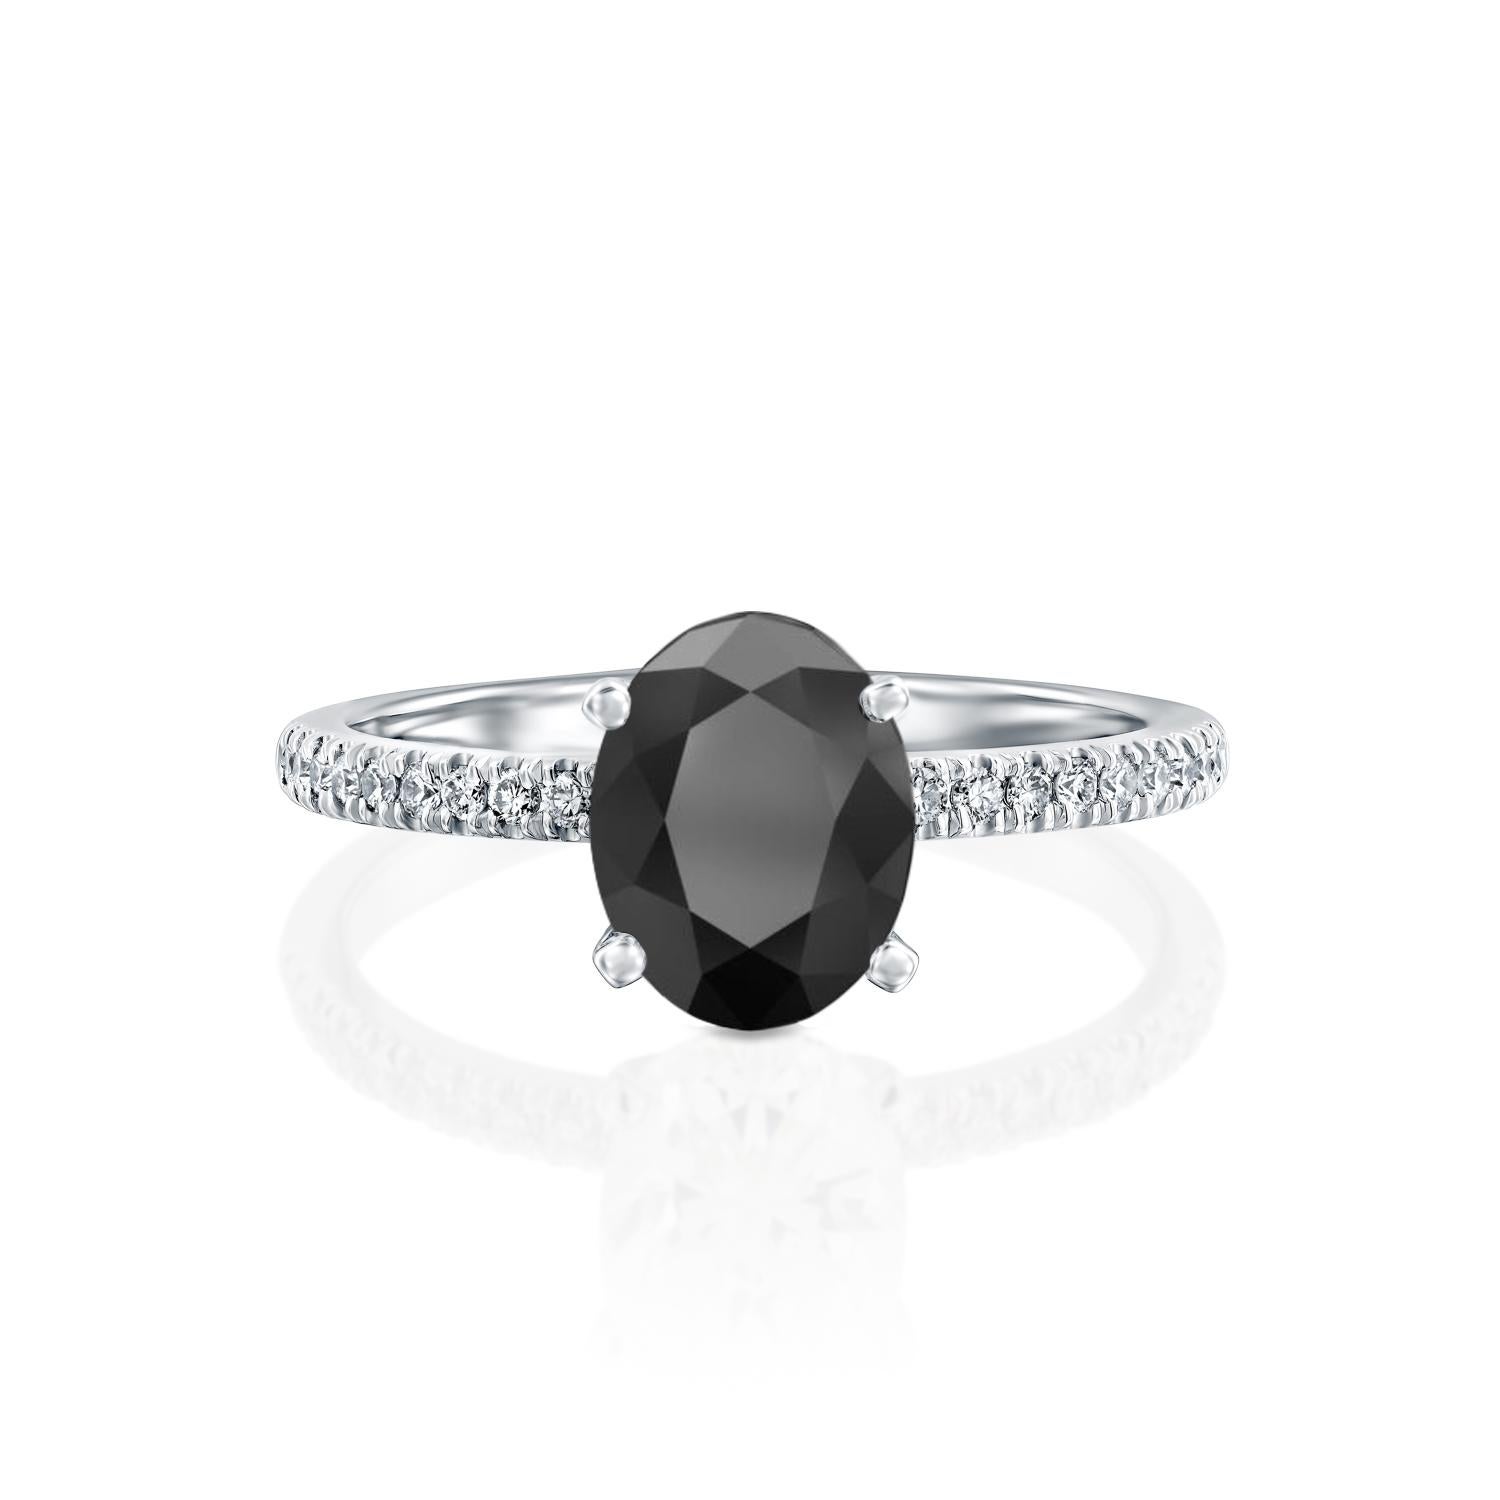 Beautiful solitaire with accents vintage style diamond engagement ring. Center stone is natural, oval shaped, AAA quality black diamond of 2 carat and it is surrounded by smaller natural diamonds approx. 0.15 total carat weight. The total carat